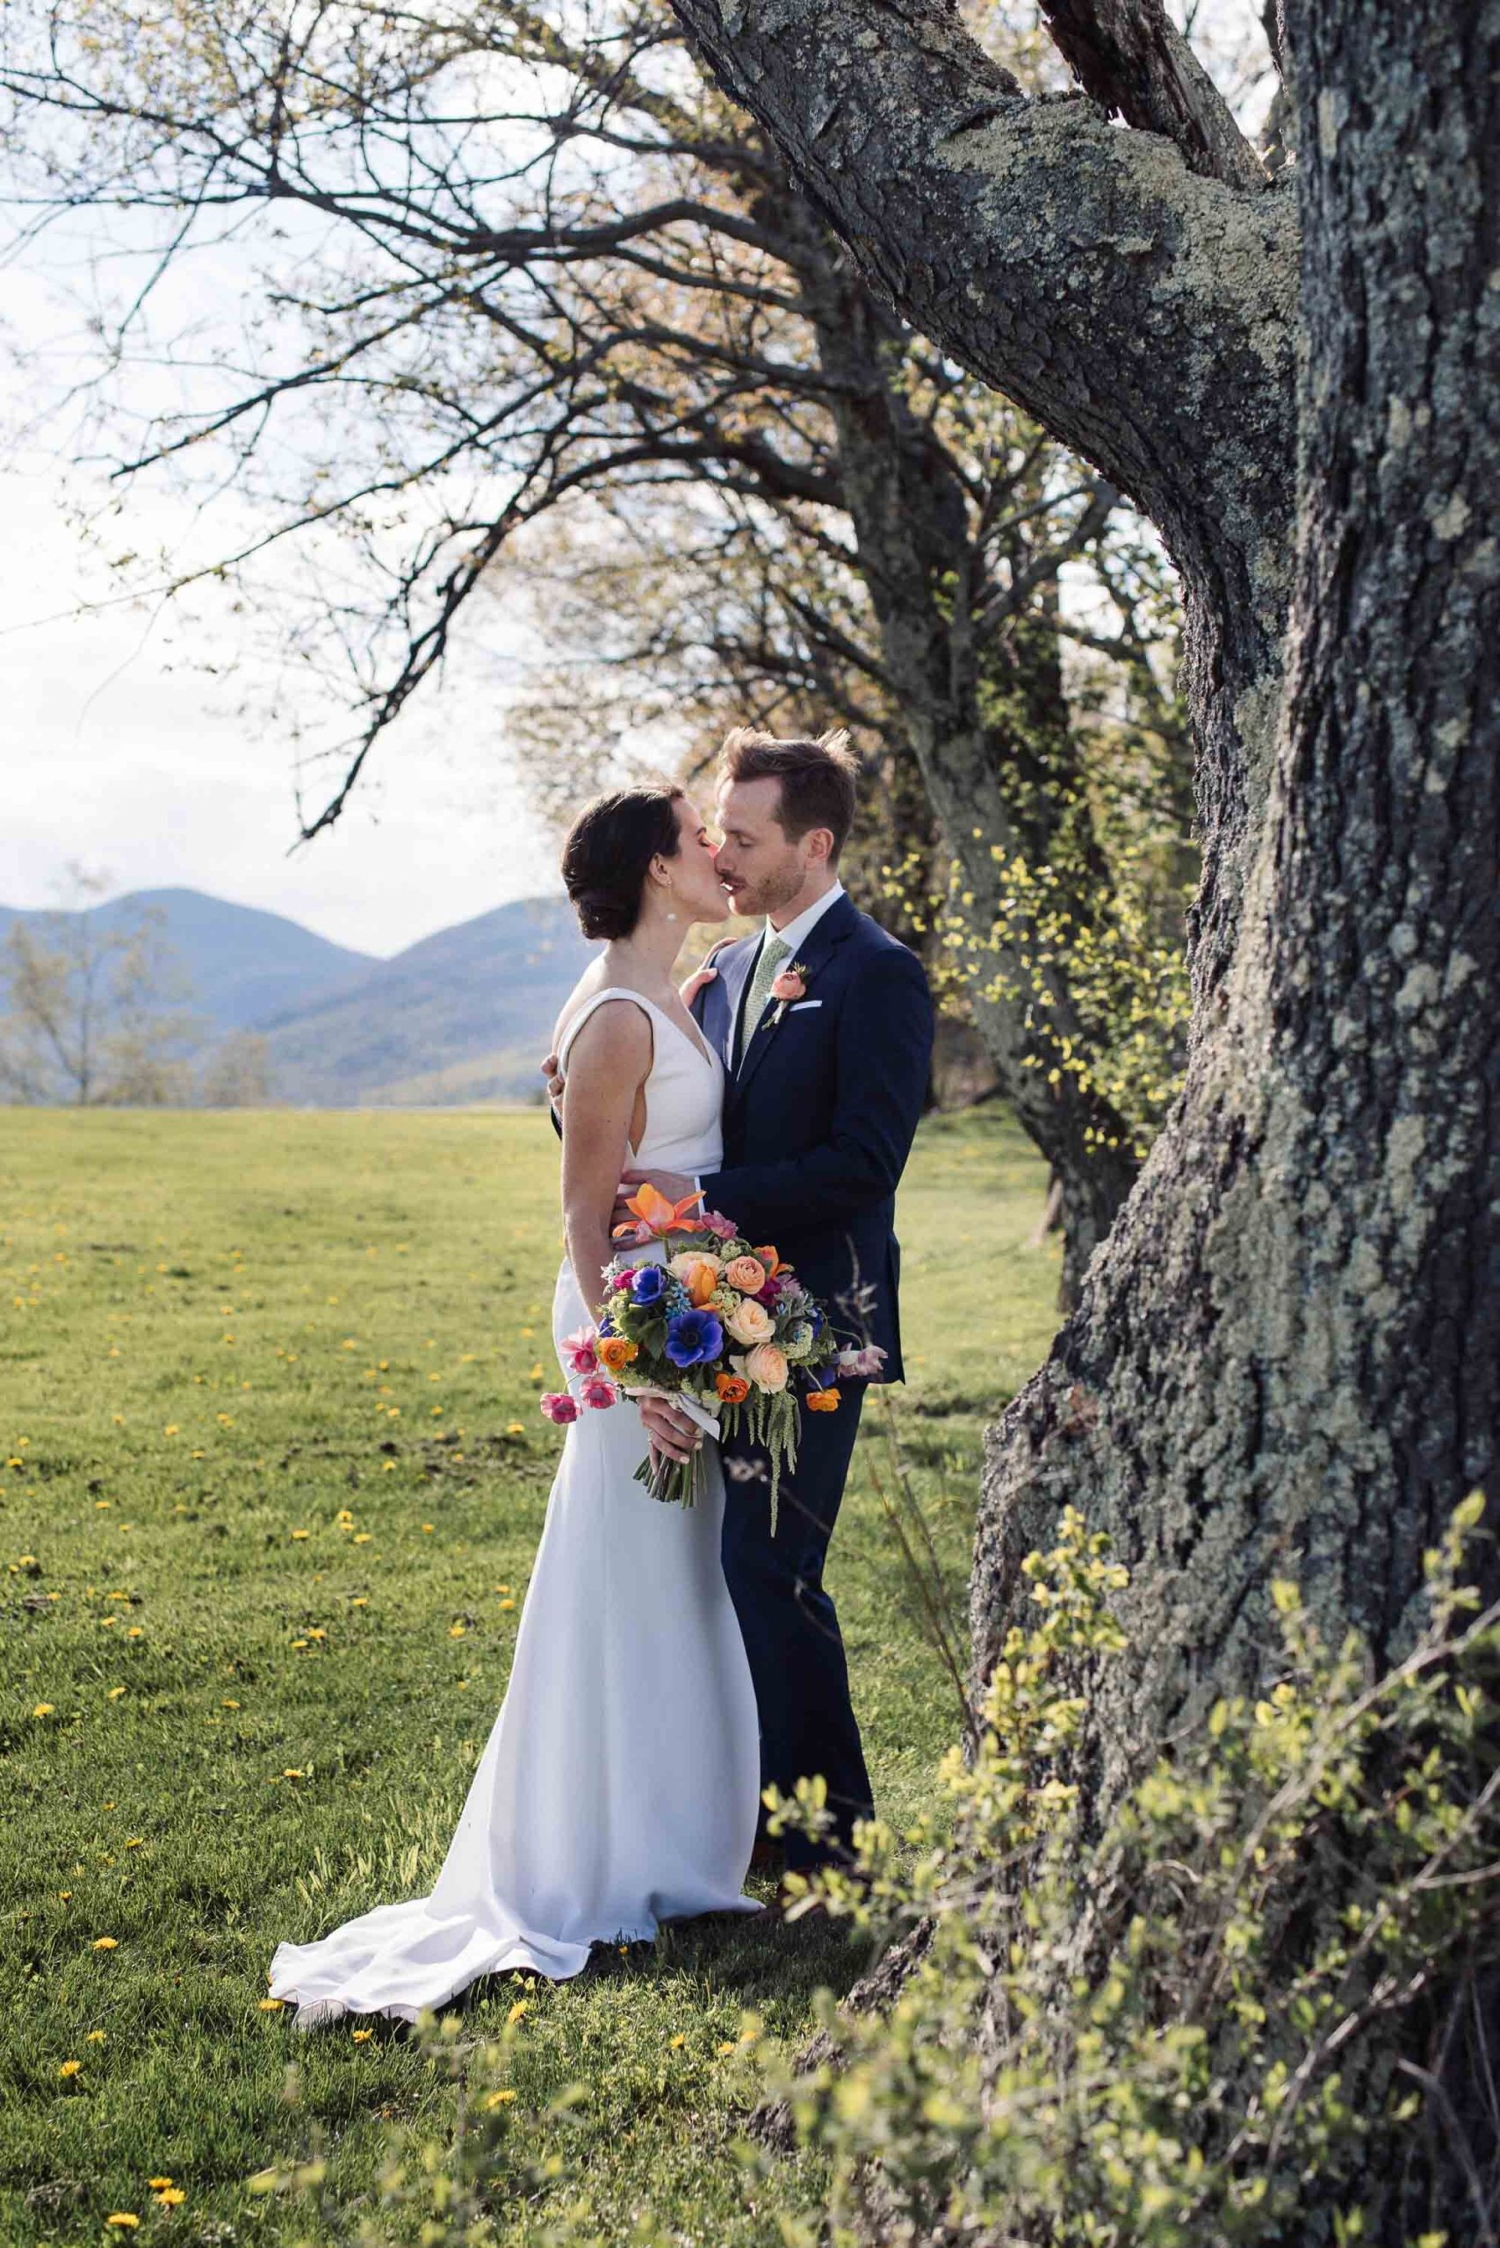 Spring wedding at Trapp Family Lodge